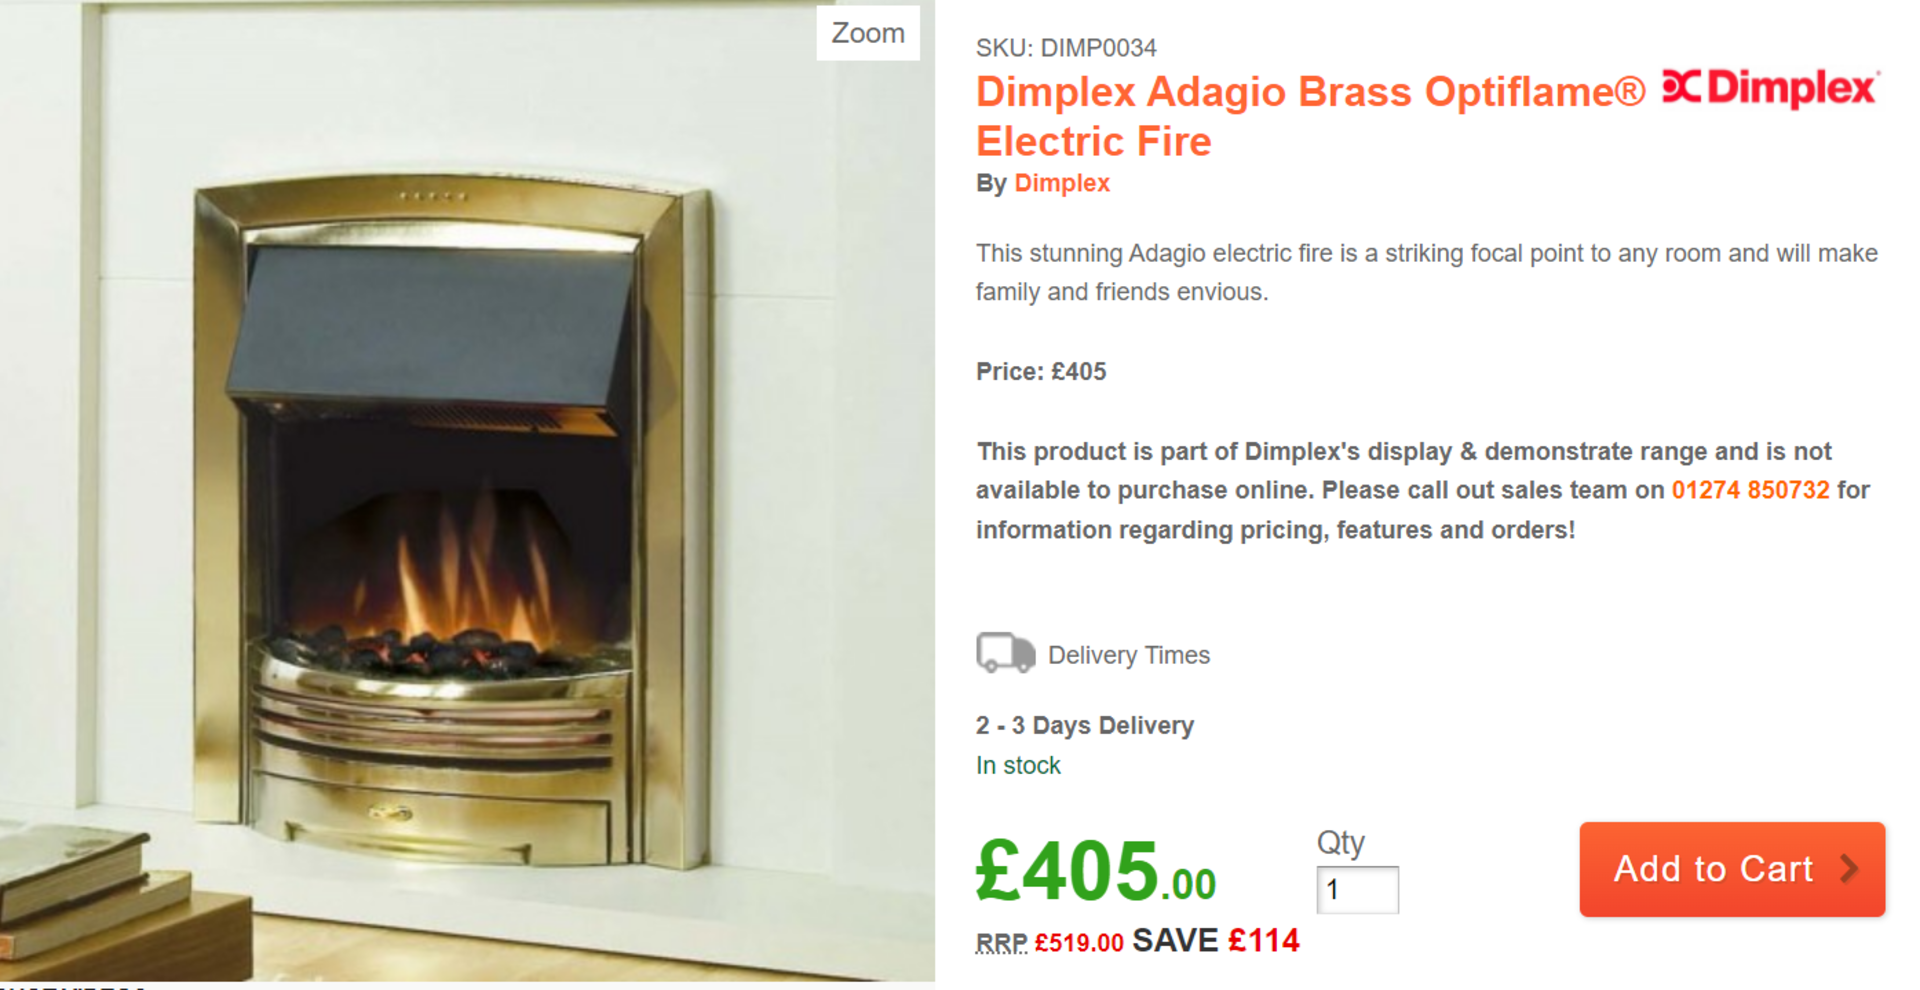 2 x BRAND NEW BOXED Dimplex Adagio Brass Optiflame Electric Fire. RRP £495 each, giving this lot a